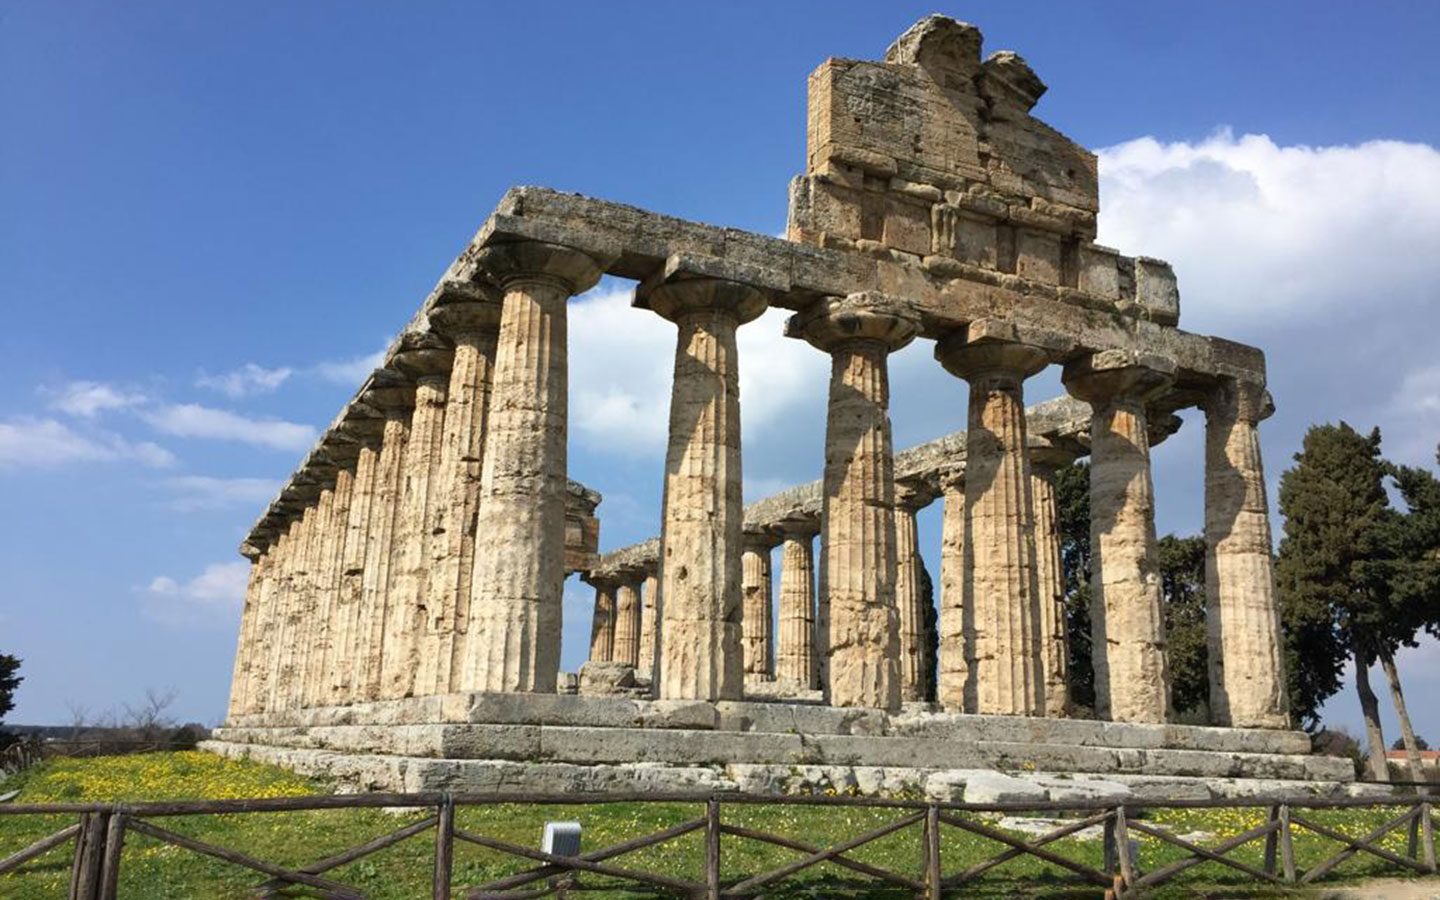 Temple of Athena at Paestum Greek archaeological site in Italy